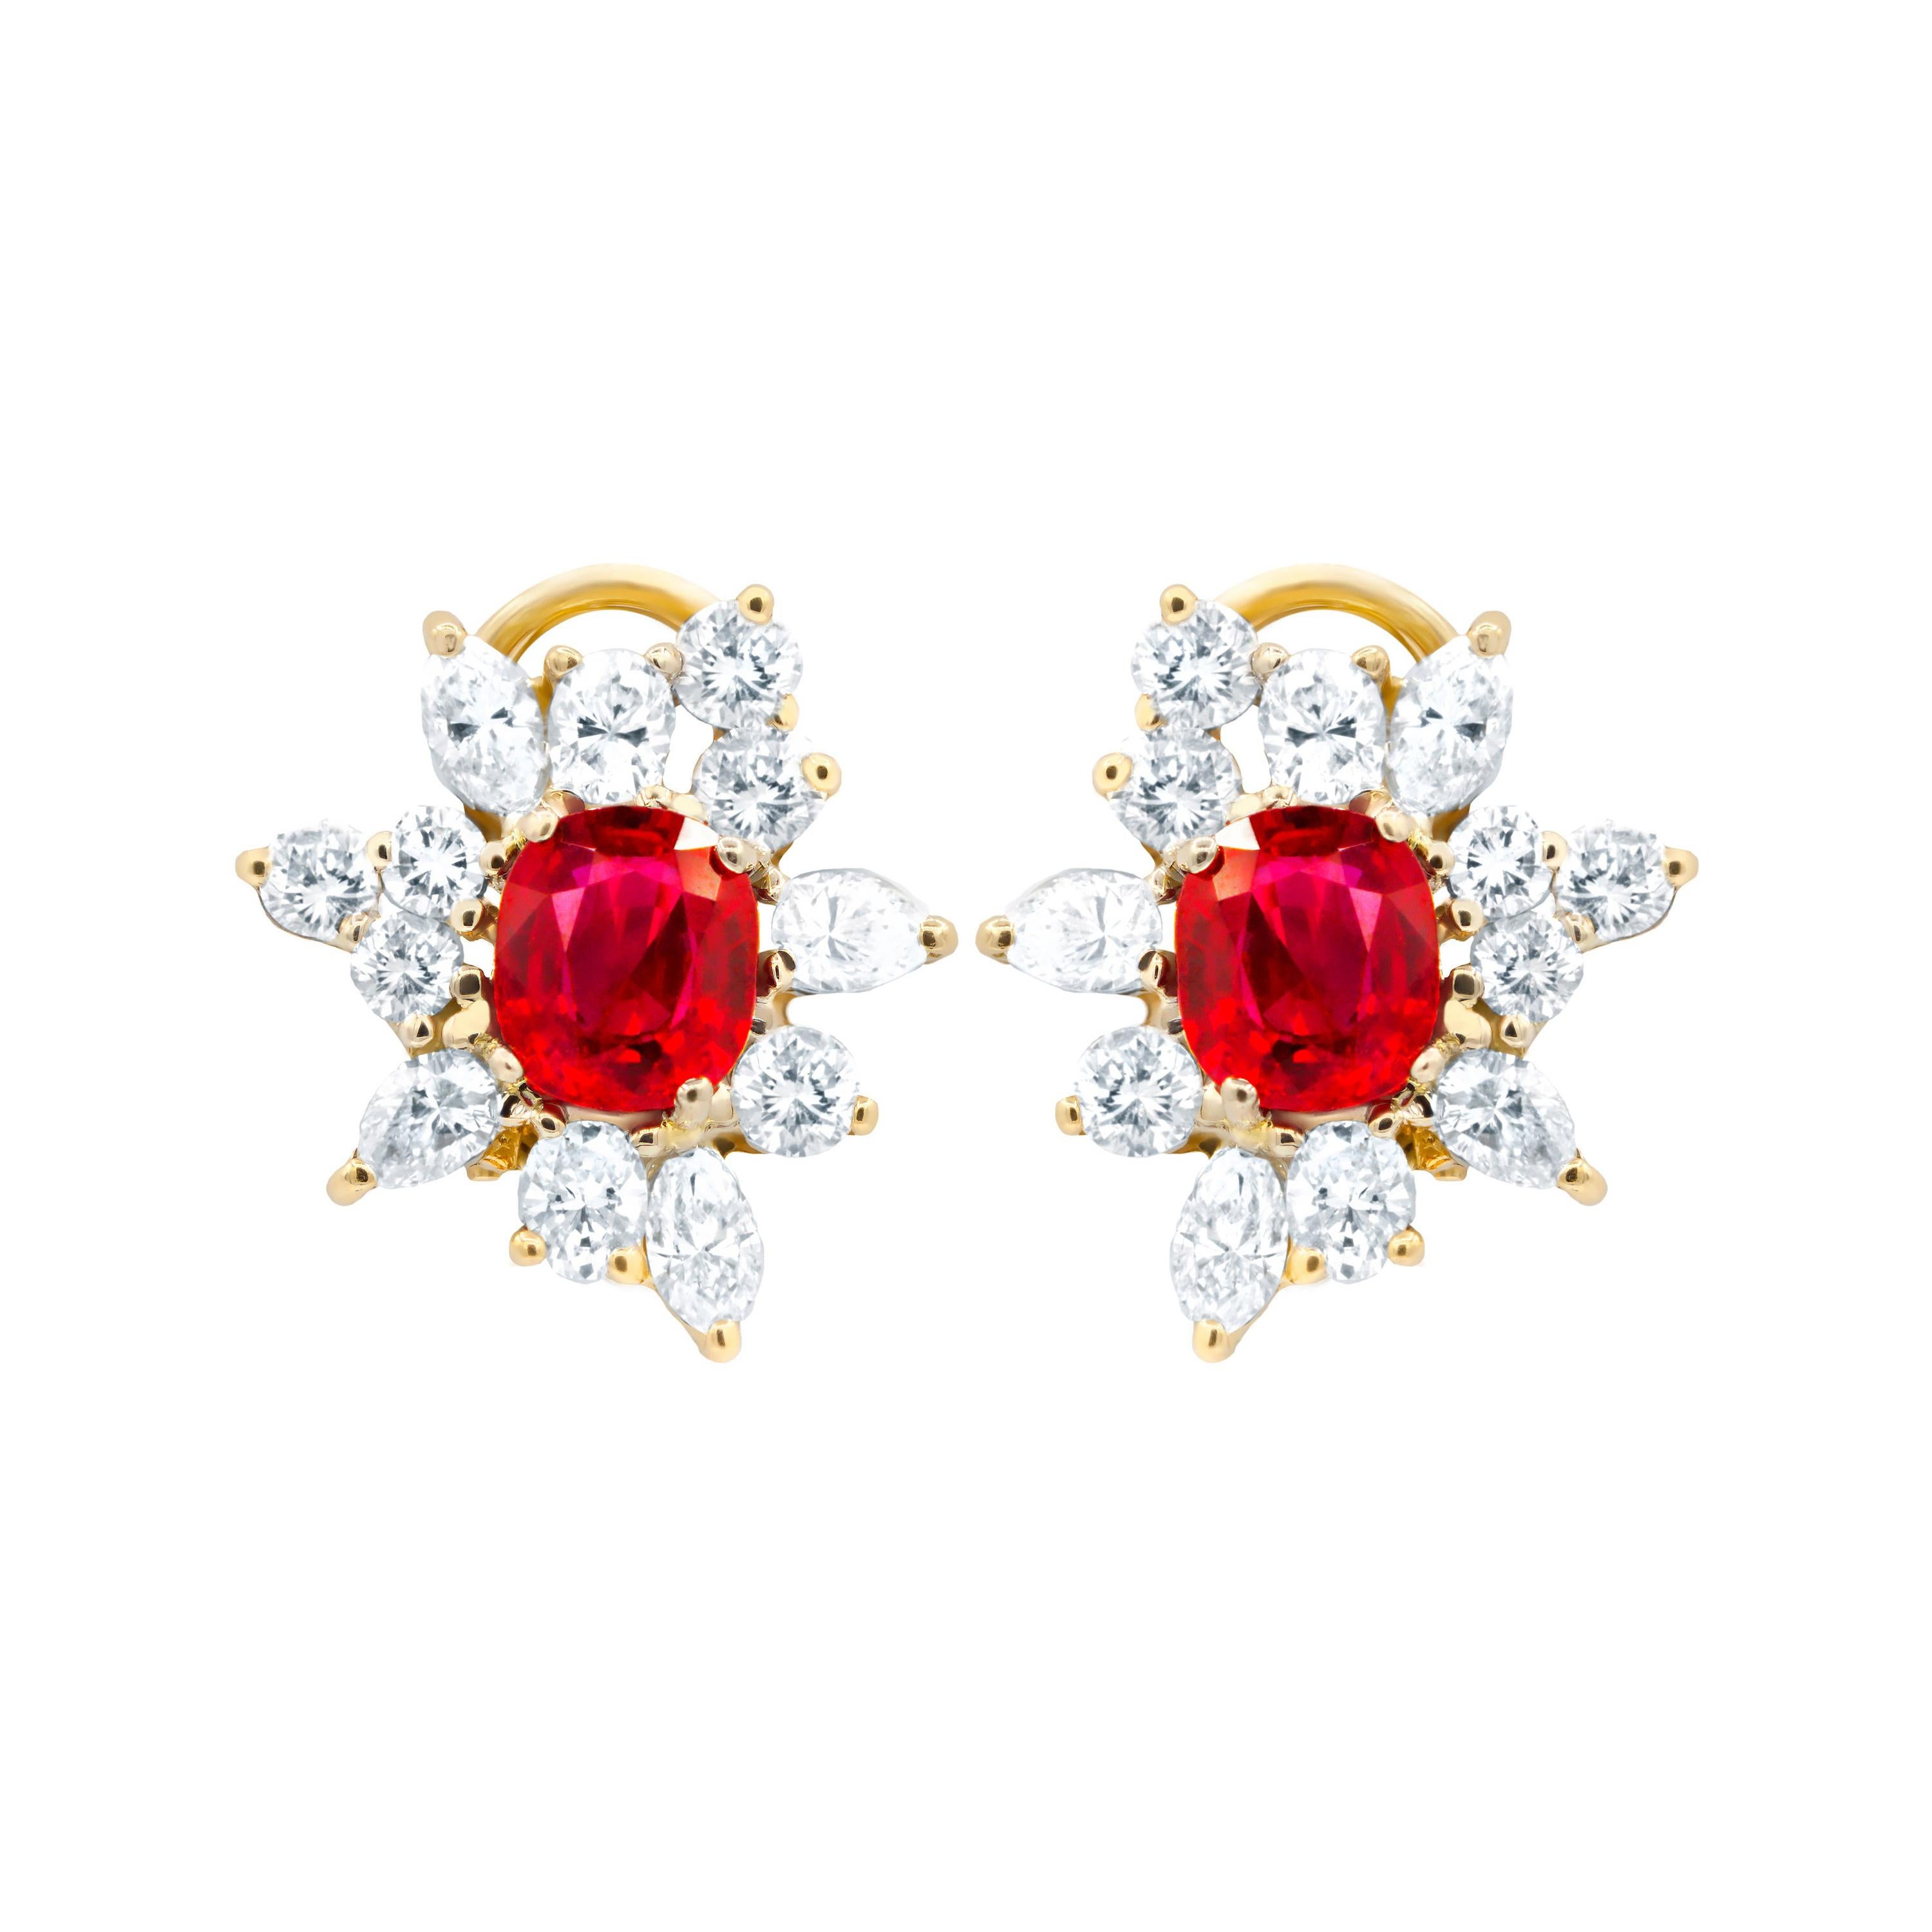 Diana M. 2.65 Carat Ruby and Diamond Snow Flake Earings in Yellow Gold For Sale